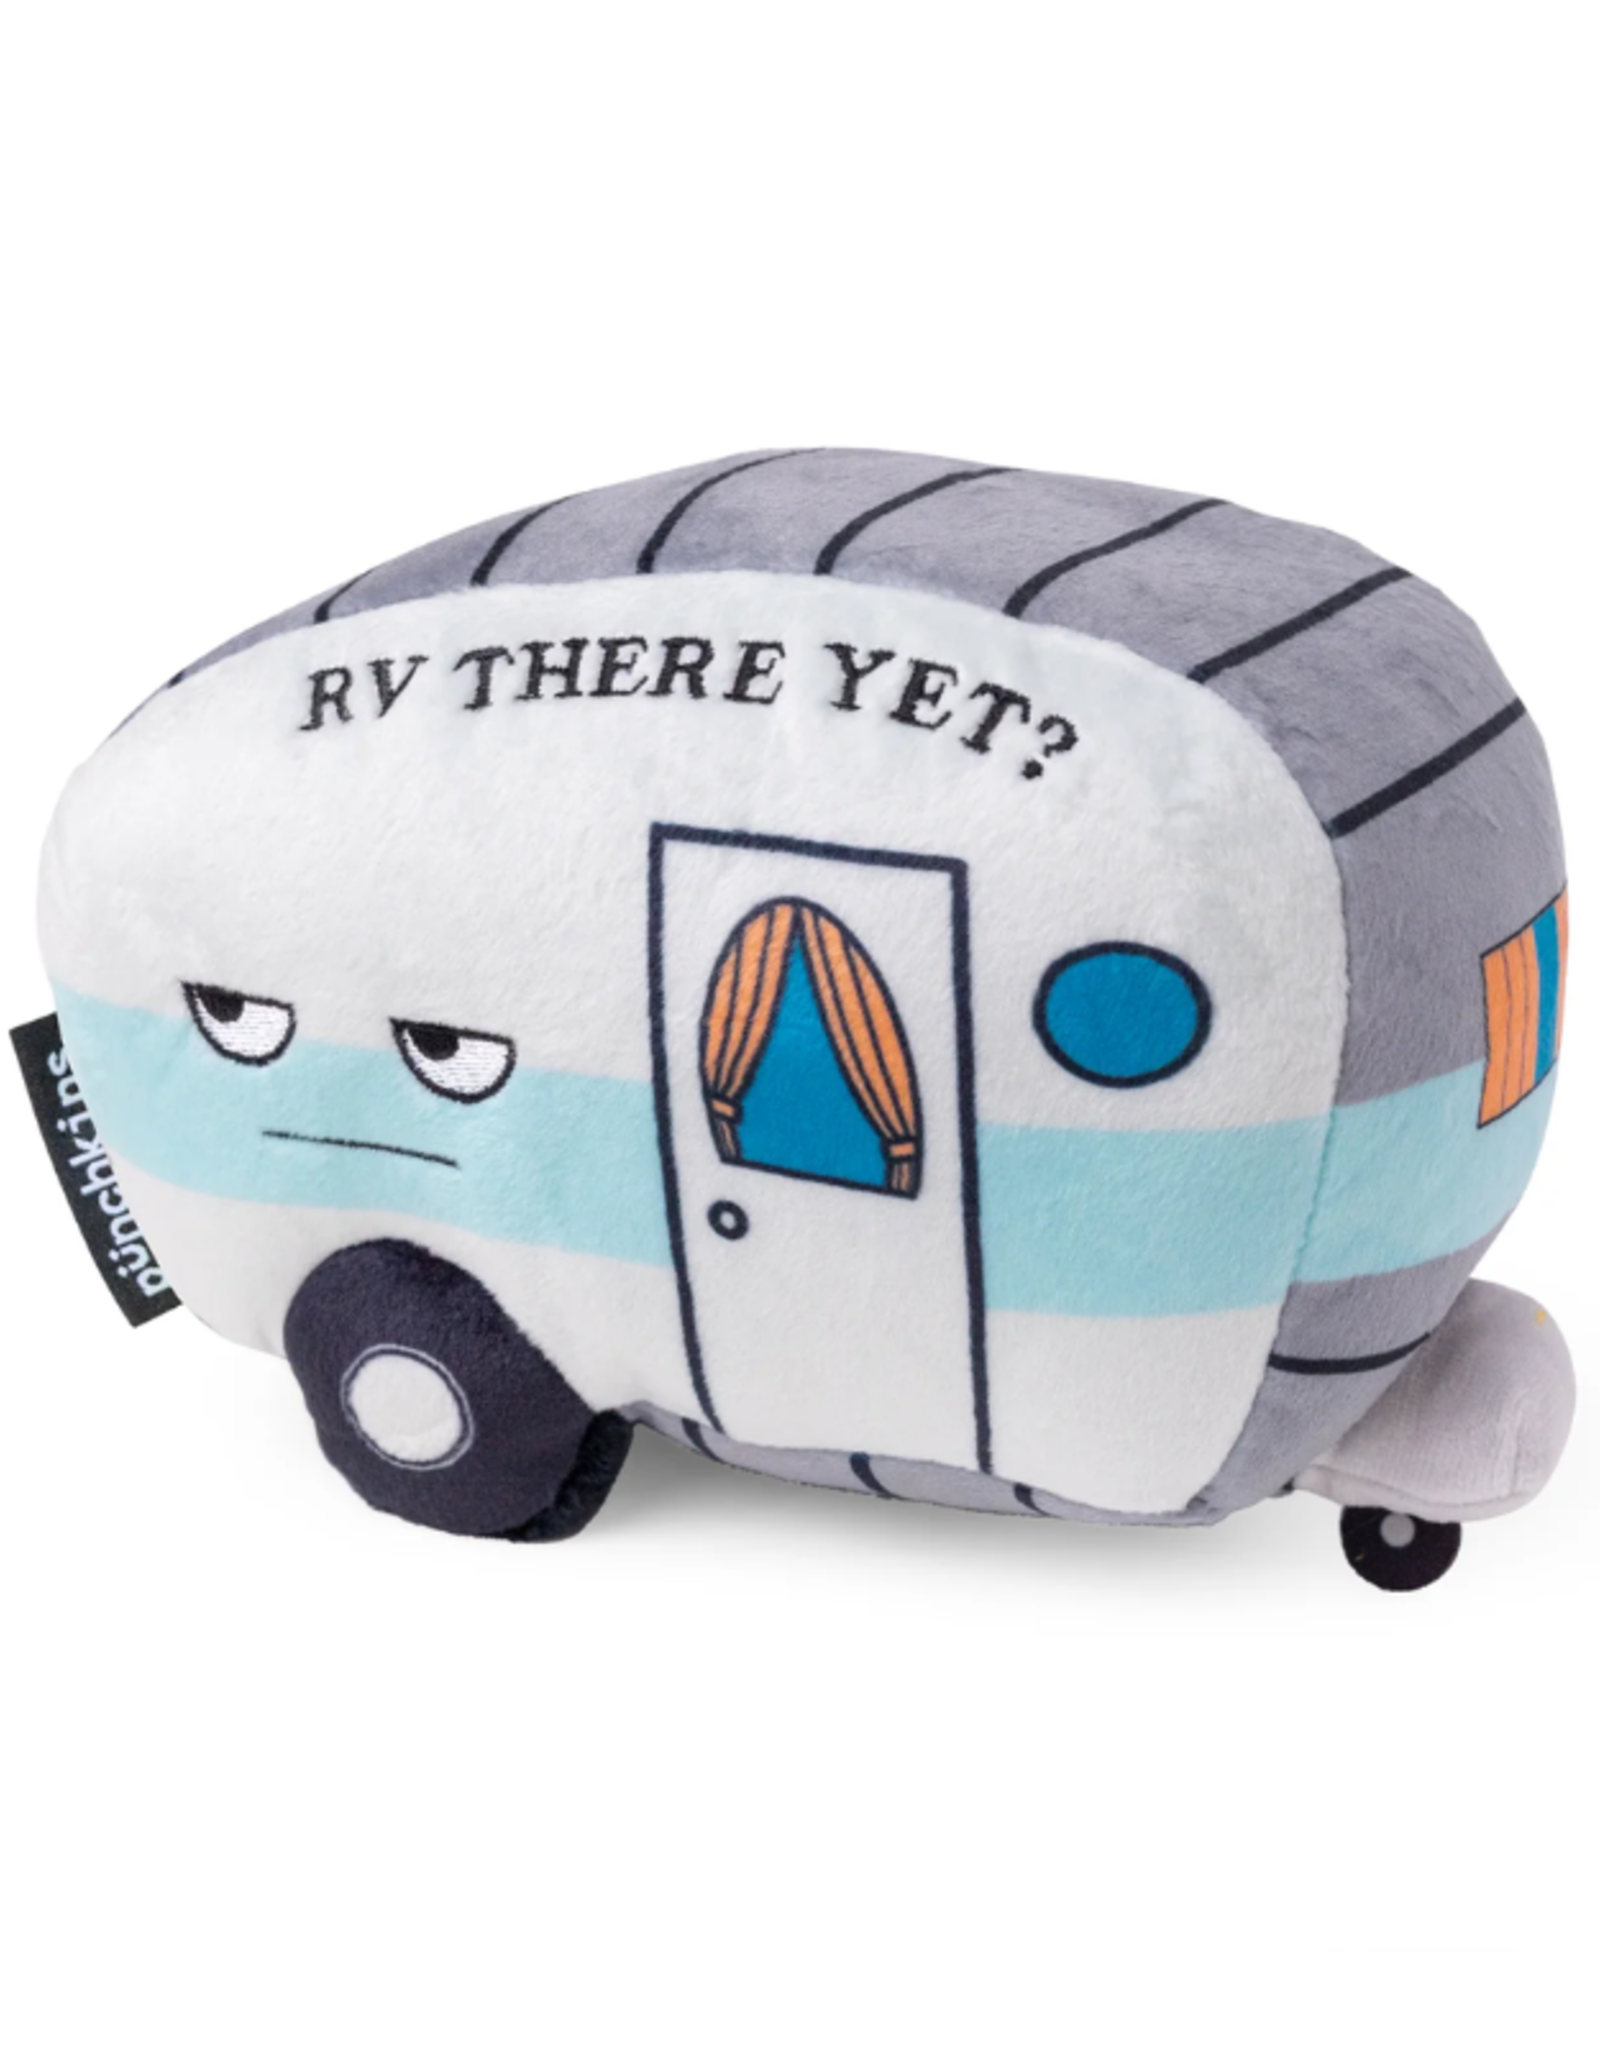 Punchkins RV - Are We There Yet